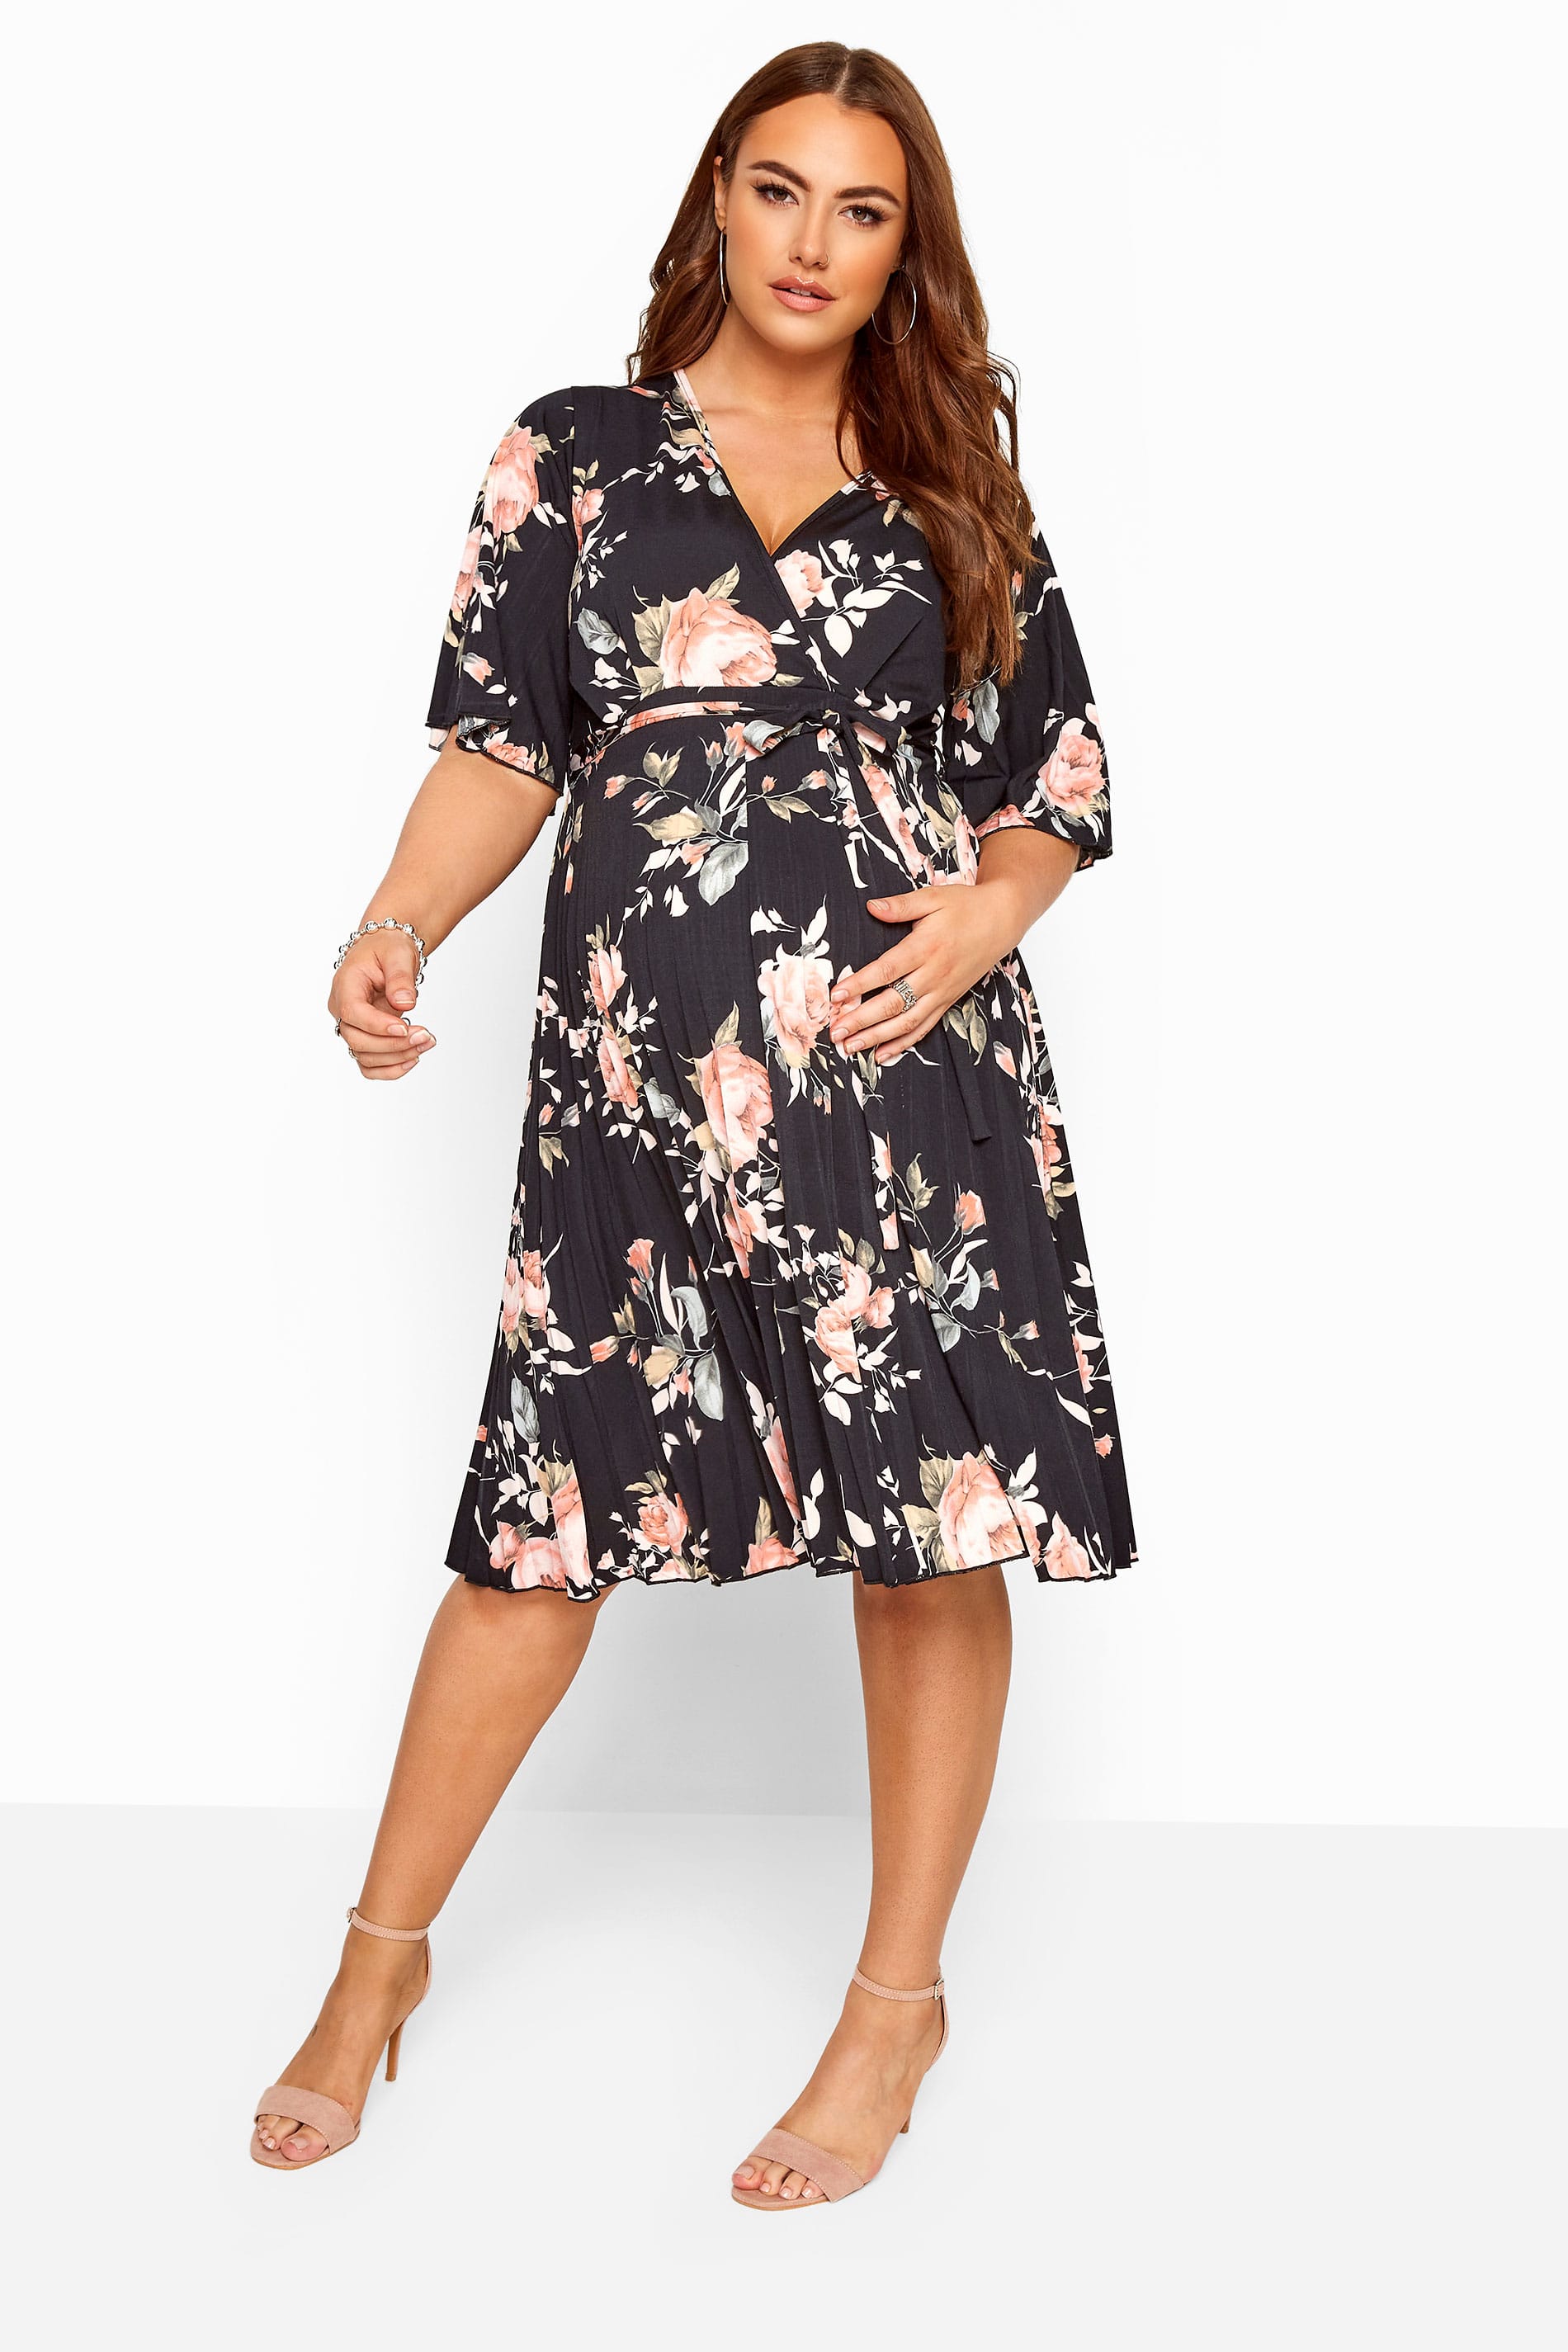 BUMP IT UP MATERNITY Black Floral Pleated Wrap Dress | Yours Clothing